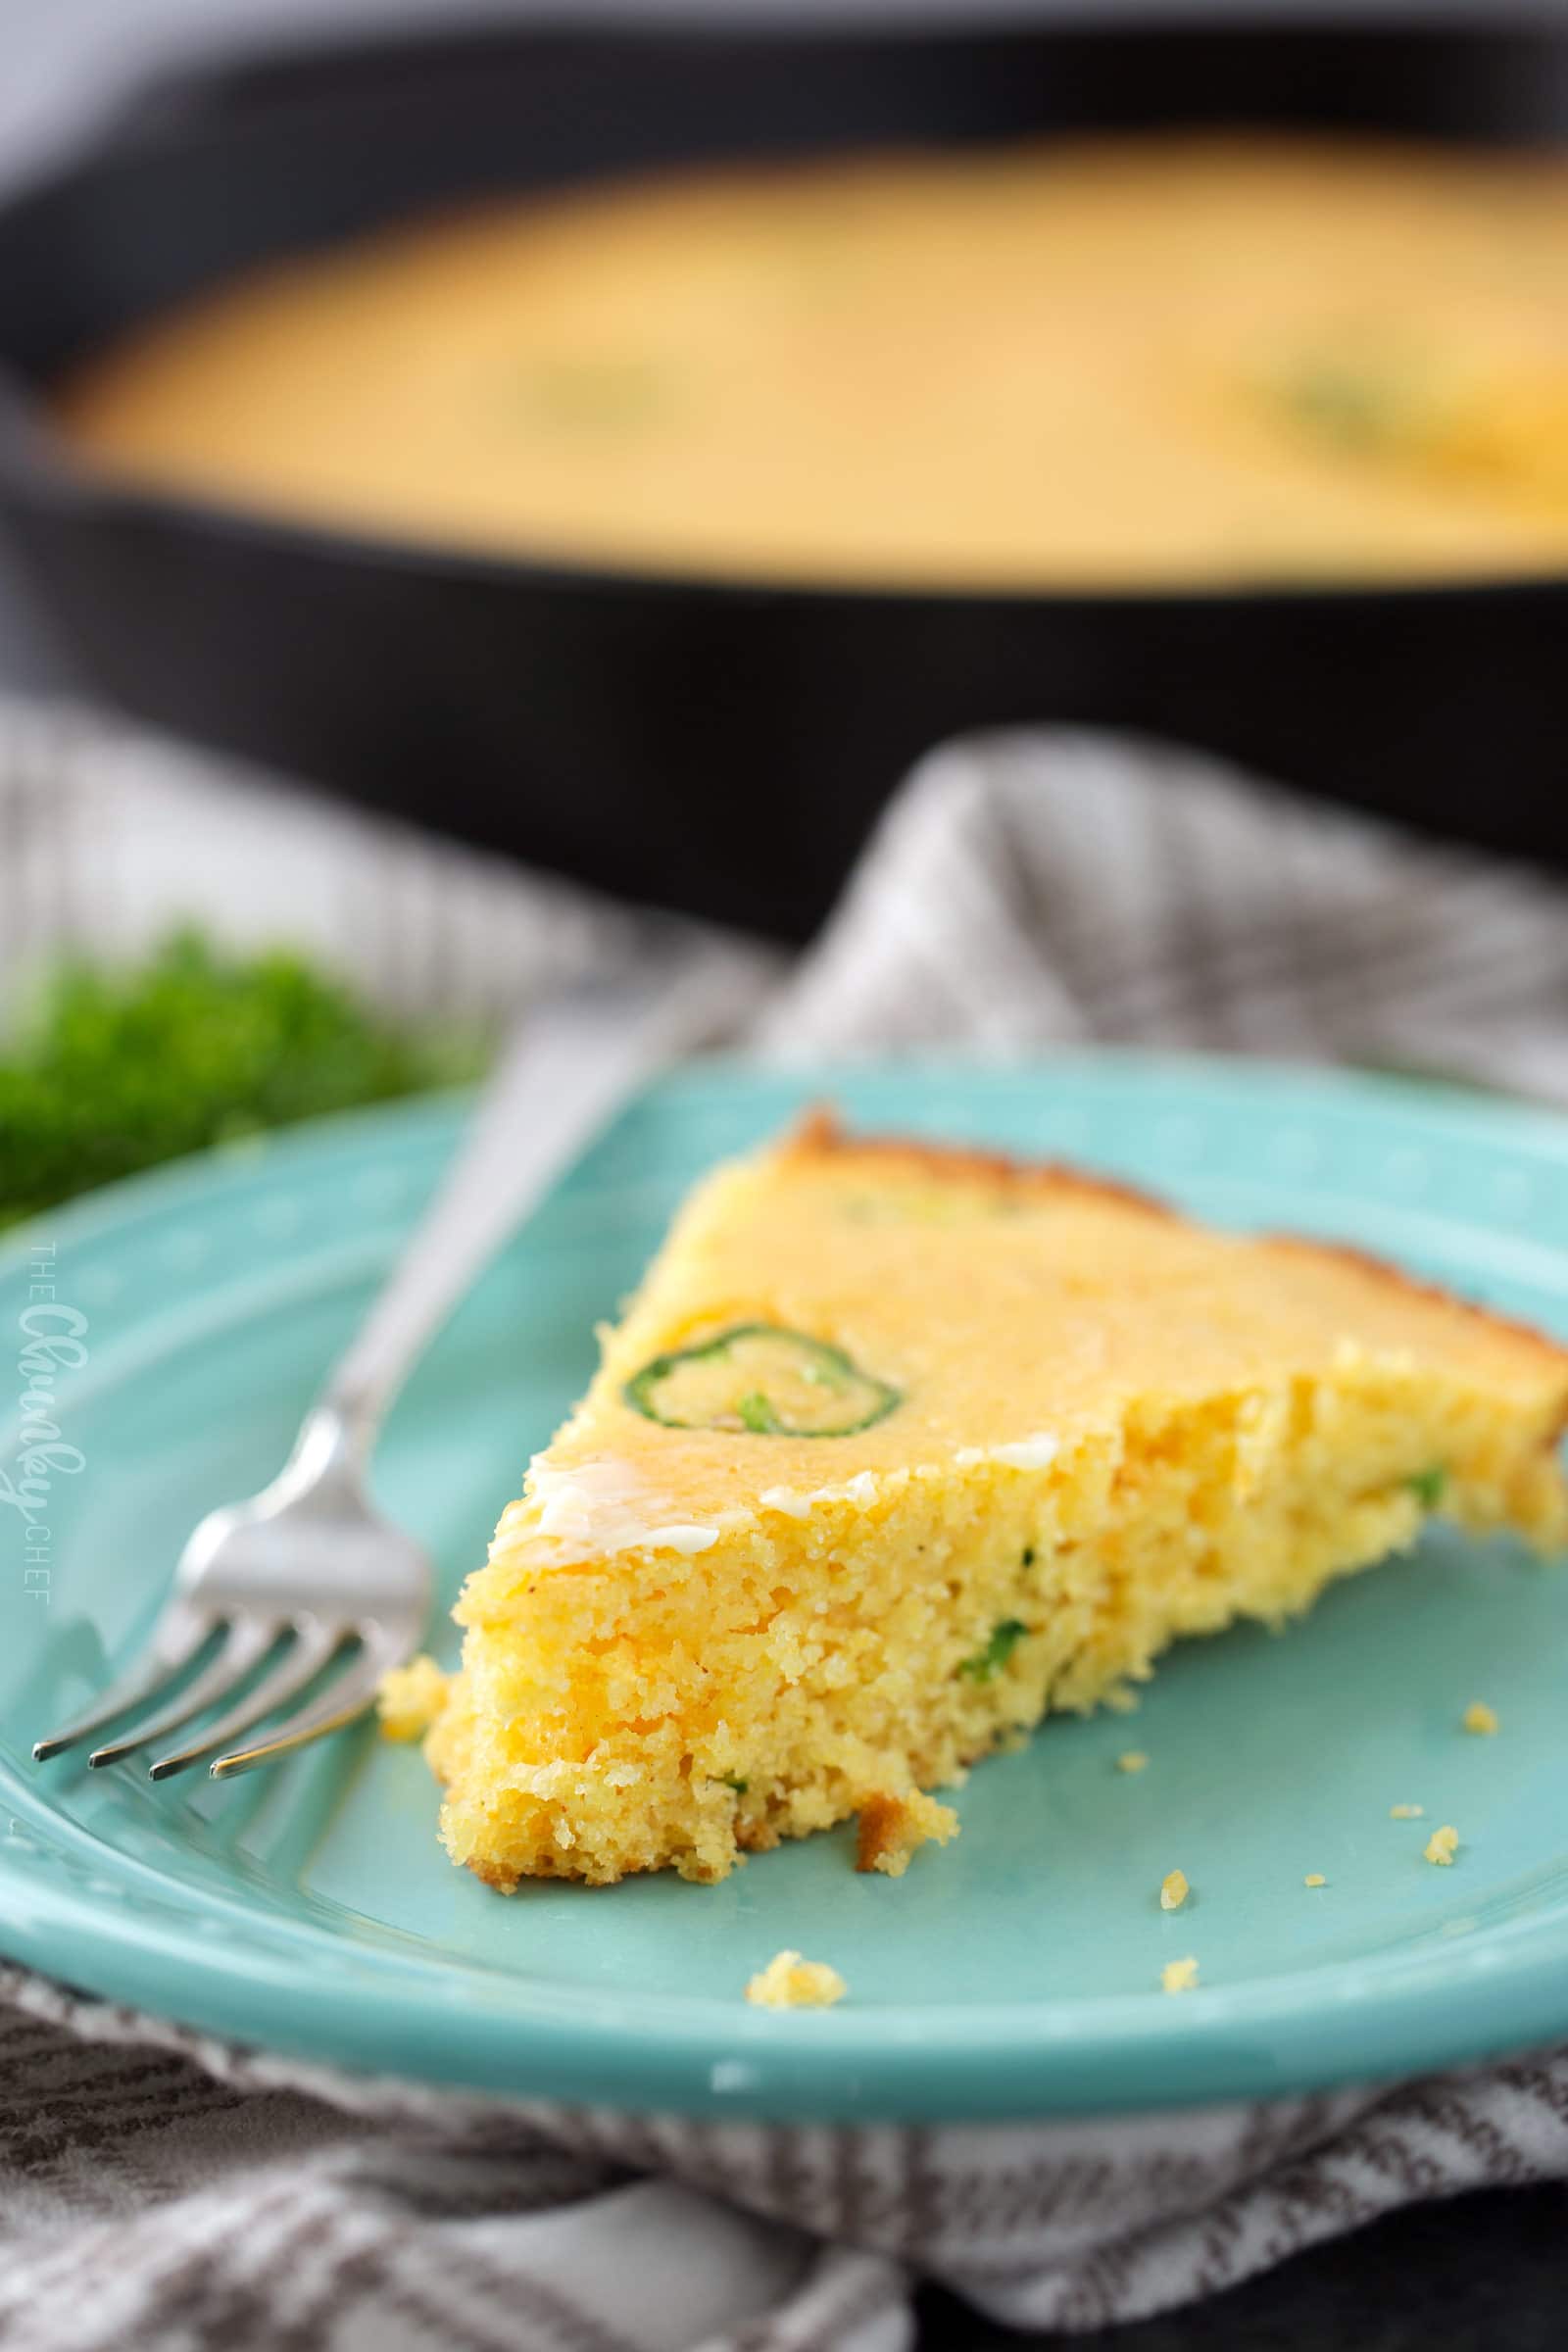 Slice of cornbread on plate with fork